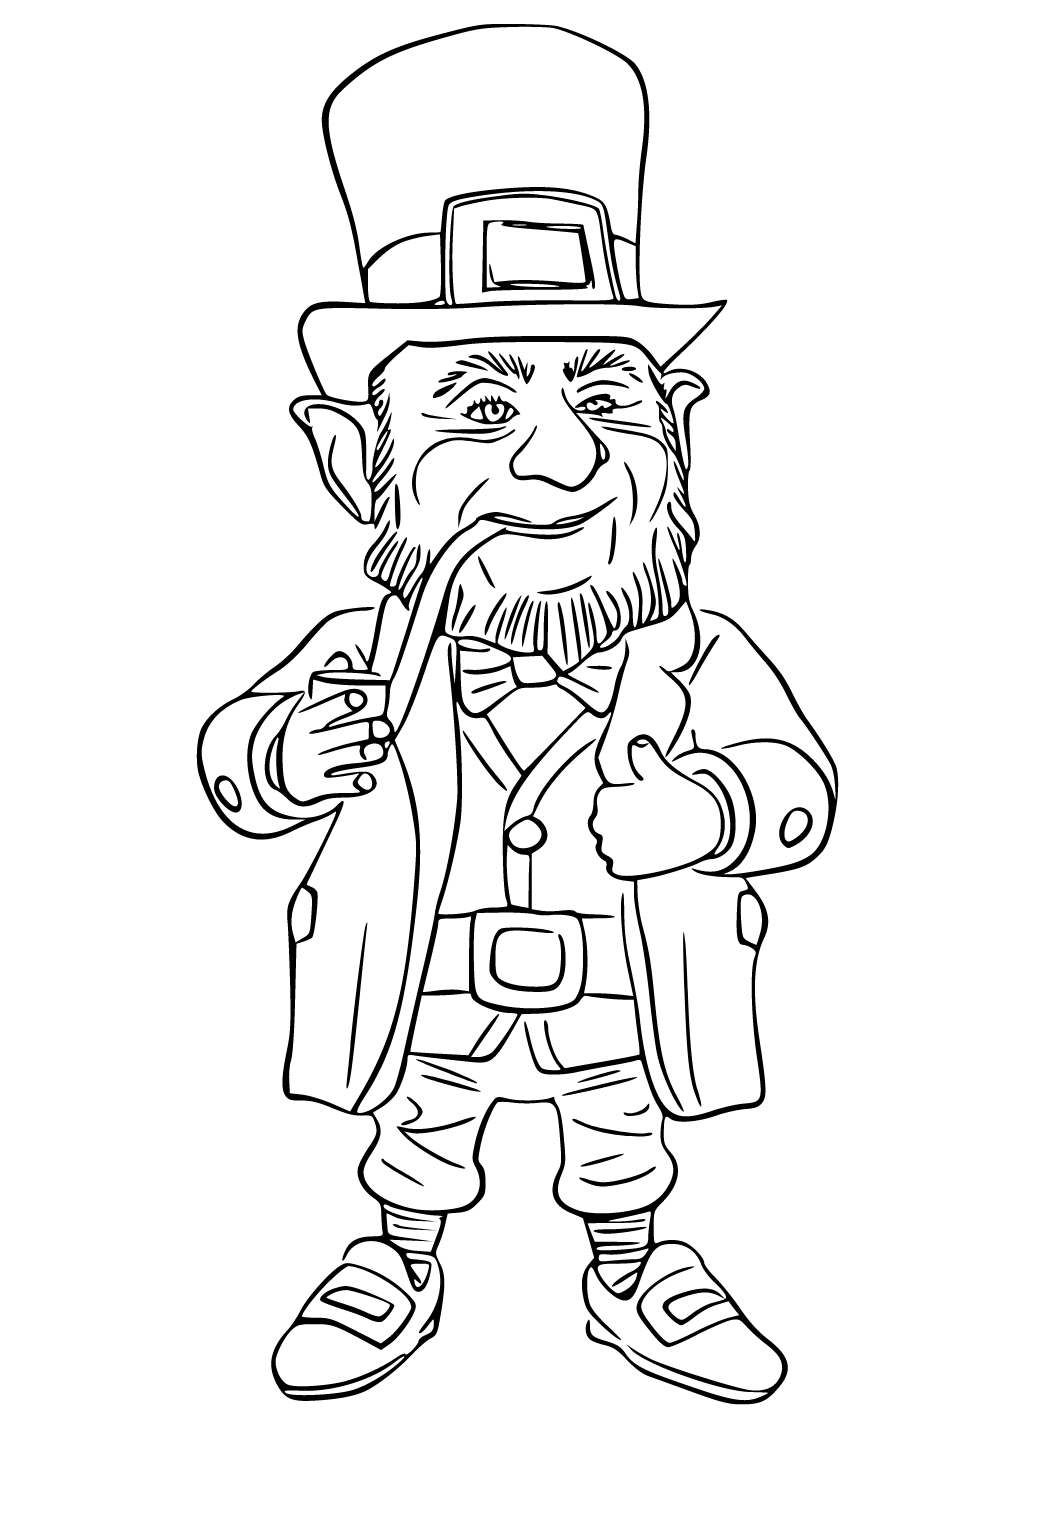 Free printable leprechaun real coloring page for adults and kids